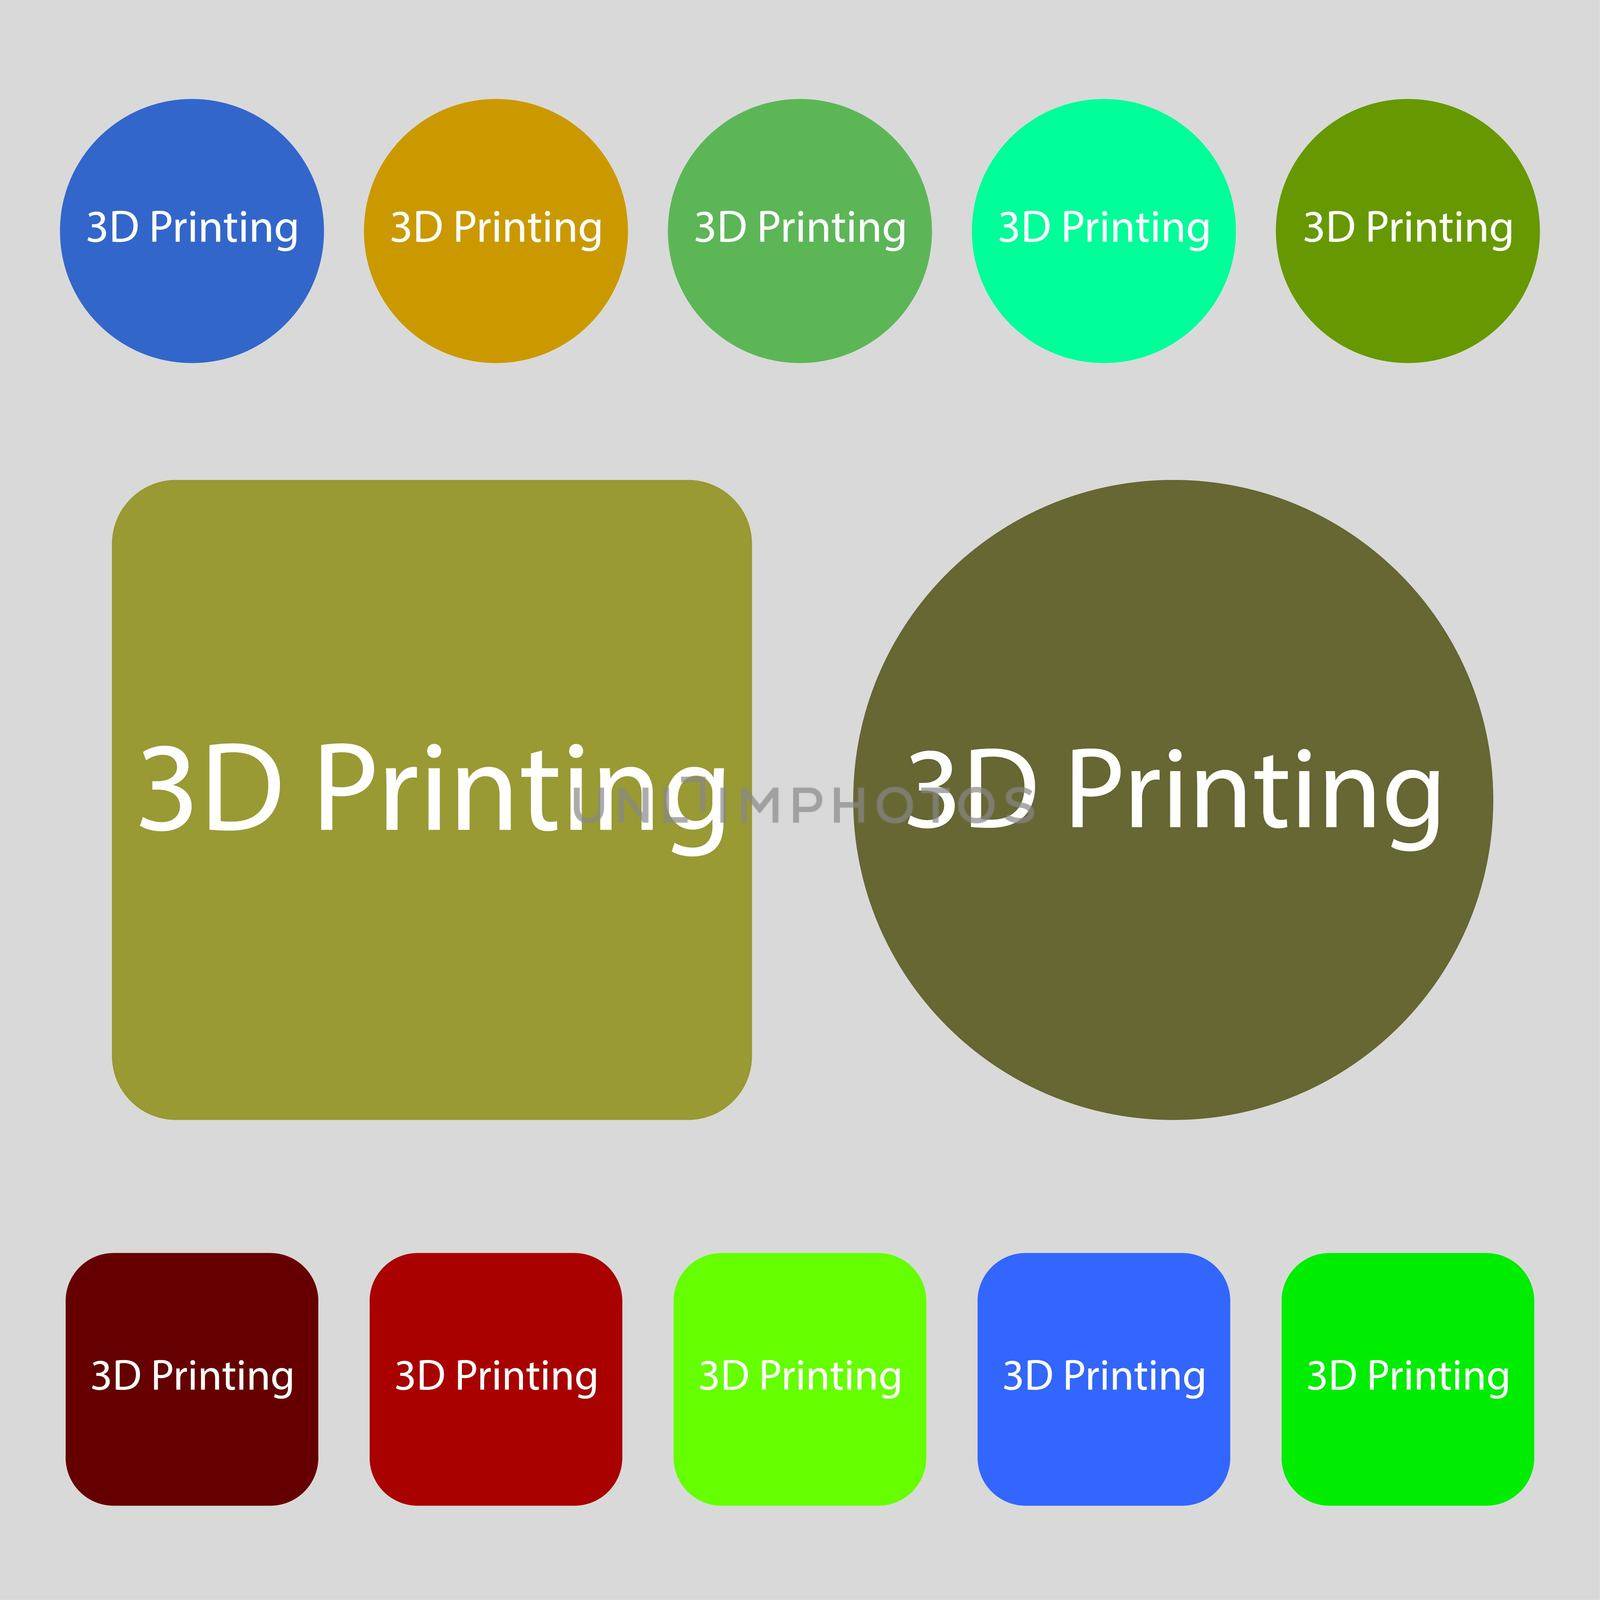 3D Print sign icon. 3d-Printing symbol.12 colored buttons. Flat design. illustration